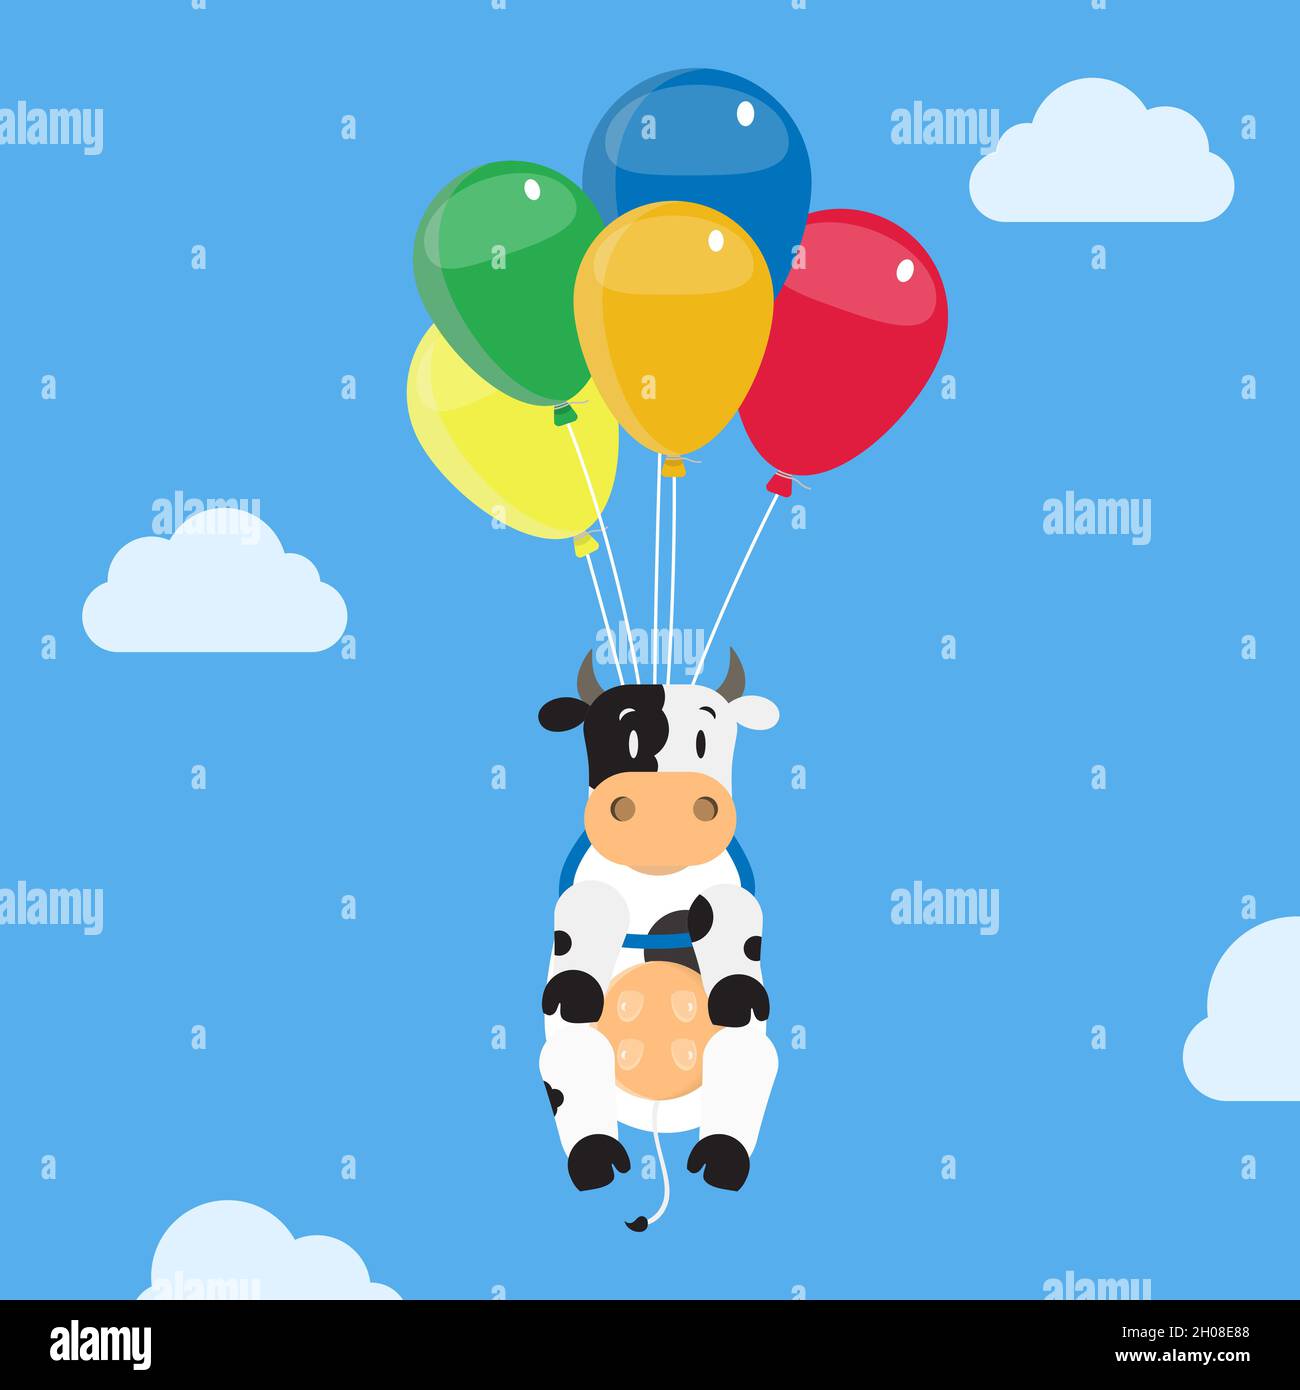 Cow flying using balloons. Comic illustration. Metaphor and fantasy. Stock Vector